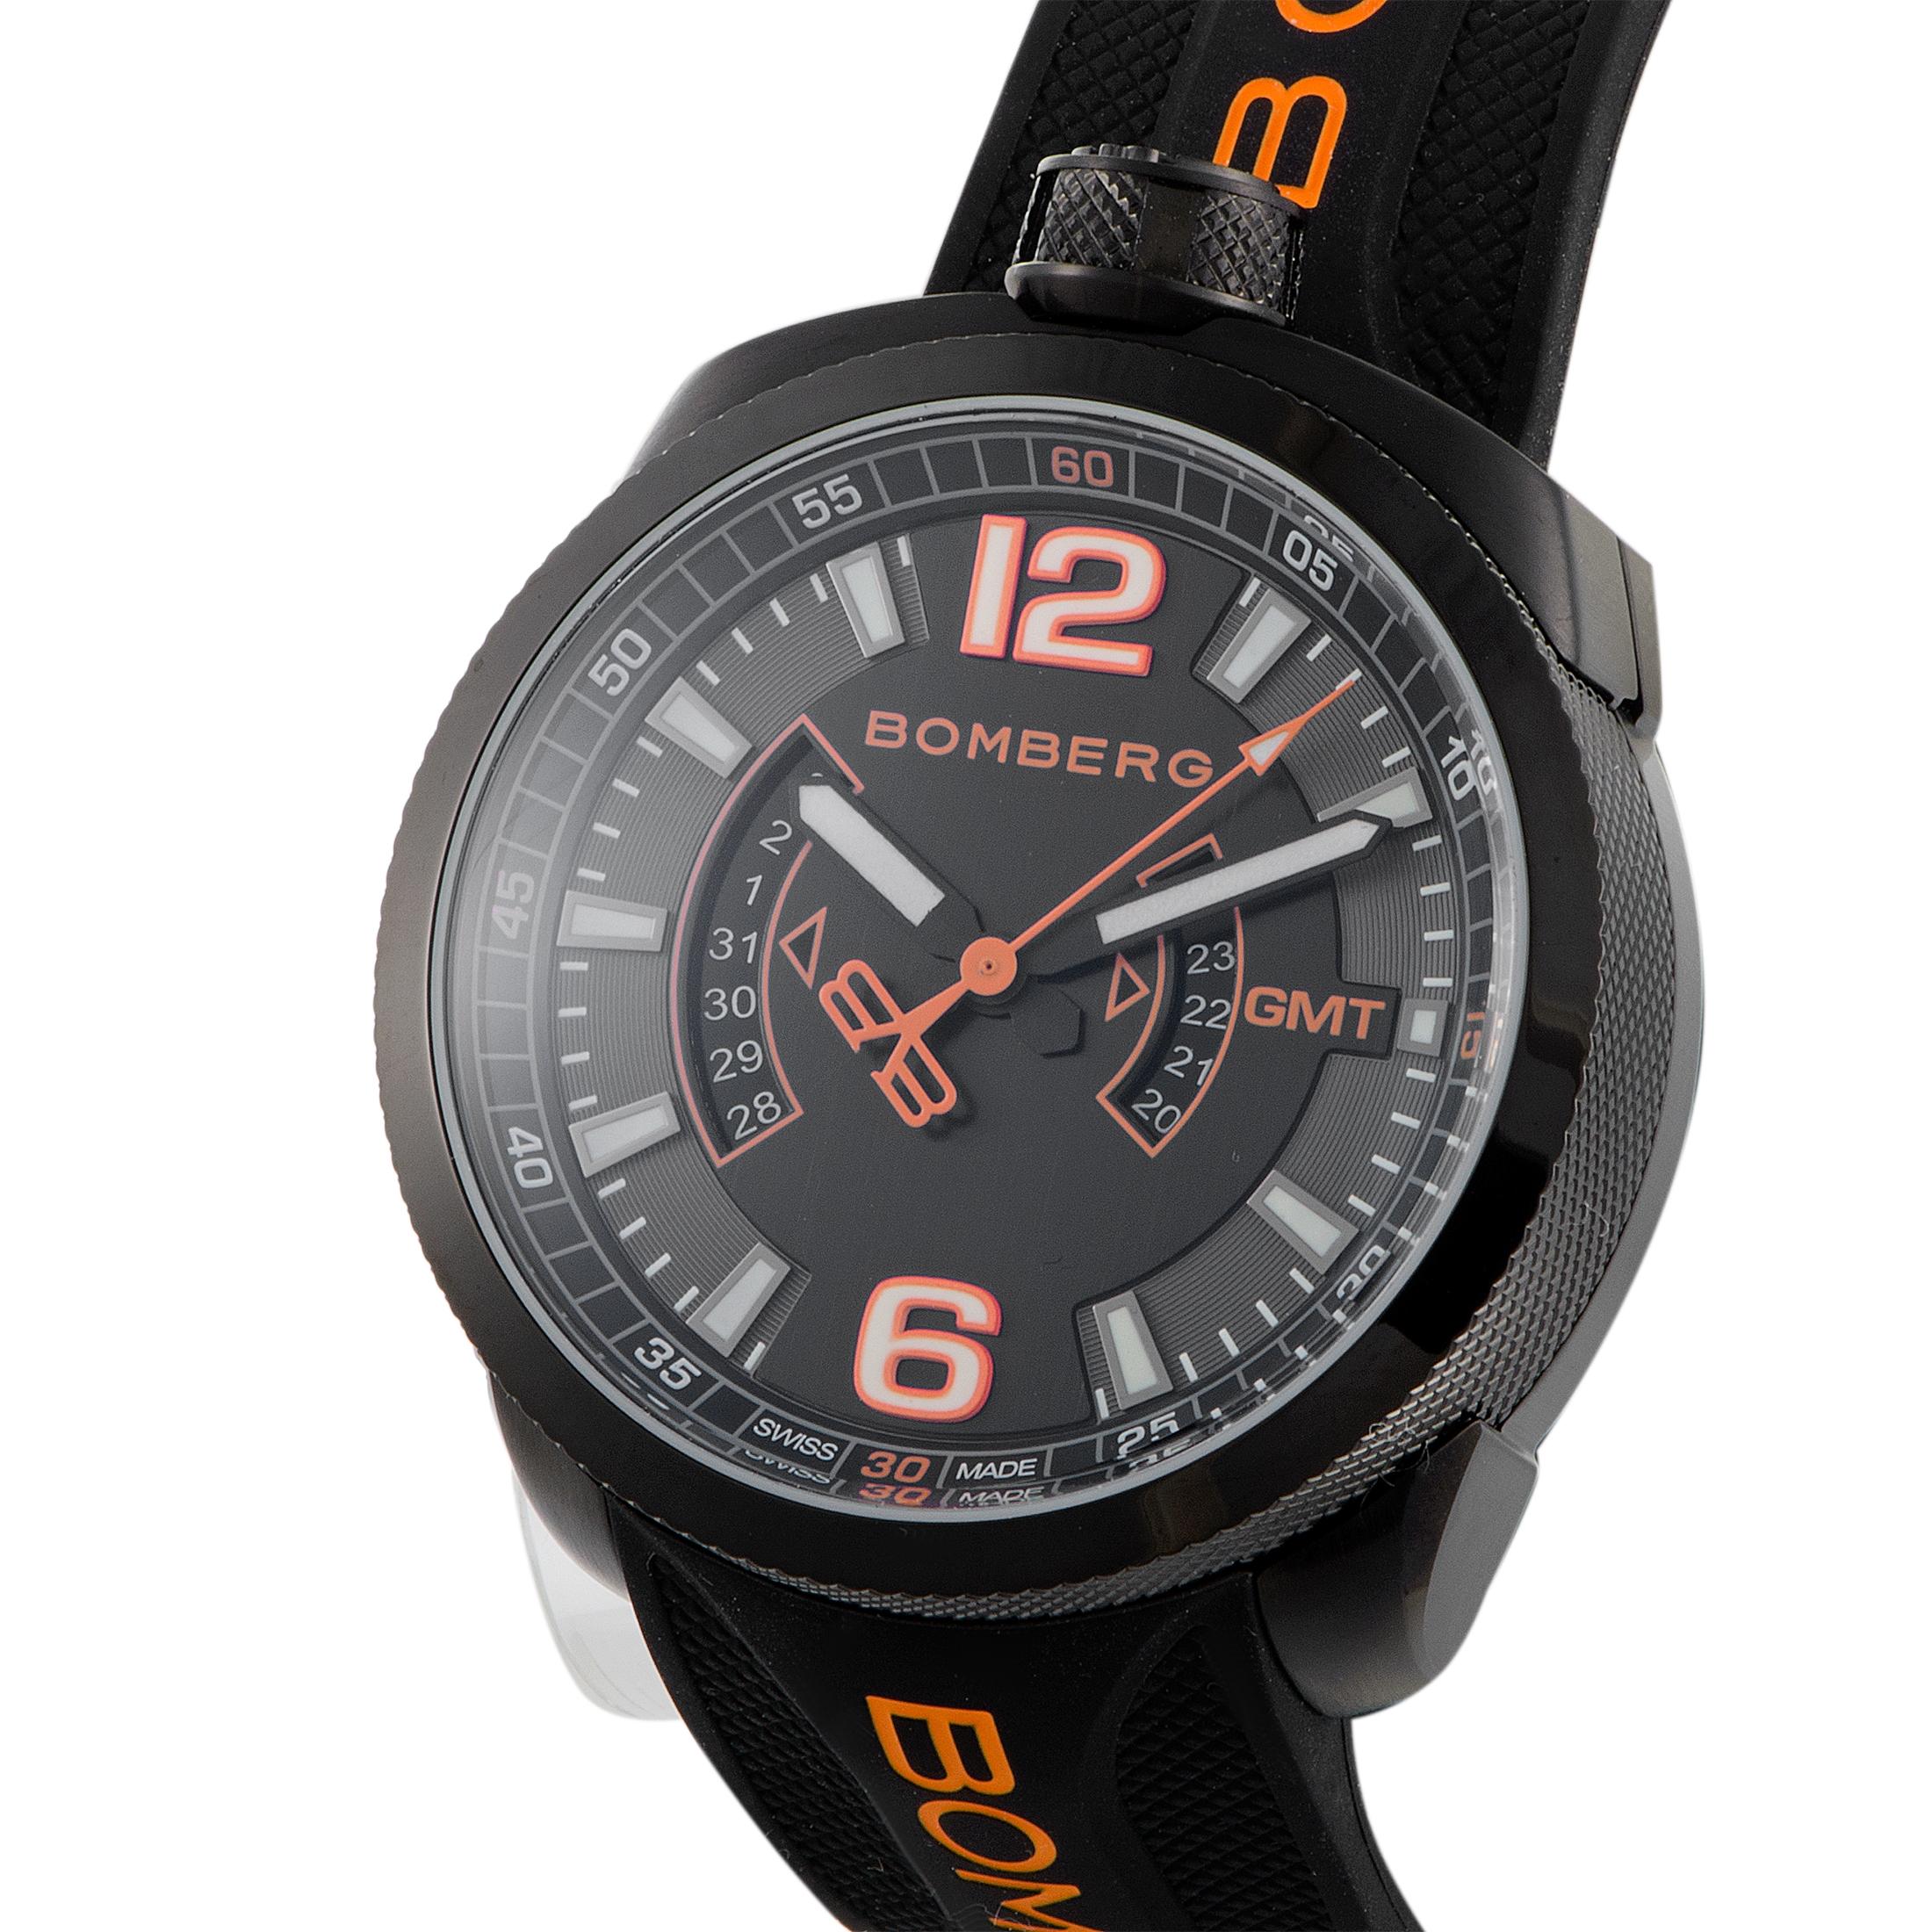 This is the Bomberg Bolt-68, reference number BS45GMTPBA.026.3.

It is presented with a 45 mm black PVD-coated stainless steel case that is mounted onto a black silicone strap fitted with a tang buckle, but can also be worn on a chain. The watch is